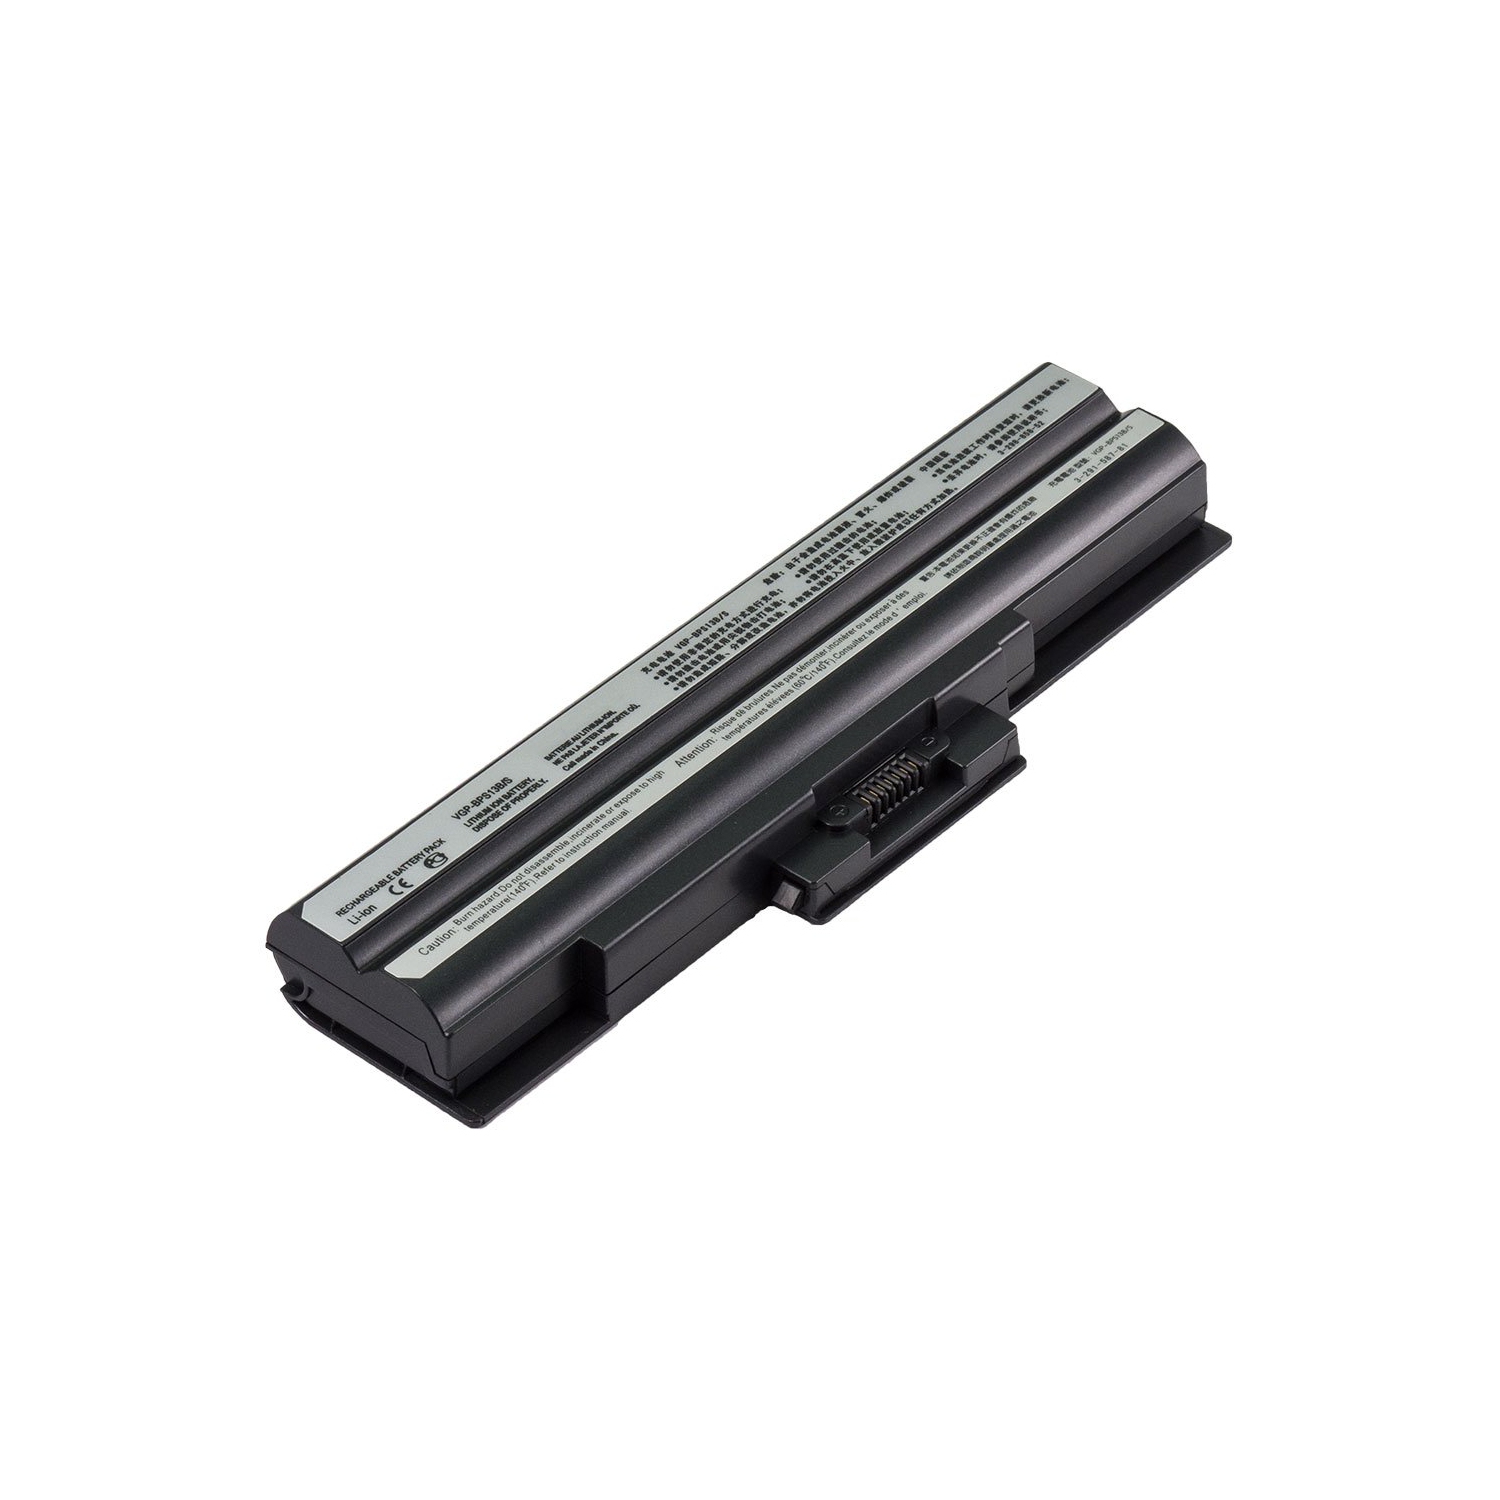 Laptop Battery Replacement for Sony VAIO VGN-FW599GBB, VGP-BPL13, VGP-BPS13/Q, VGP-BPS13A/B, VGP-BPS13A/S, VGP-BPS13A